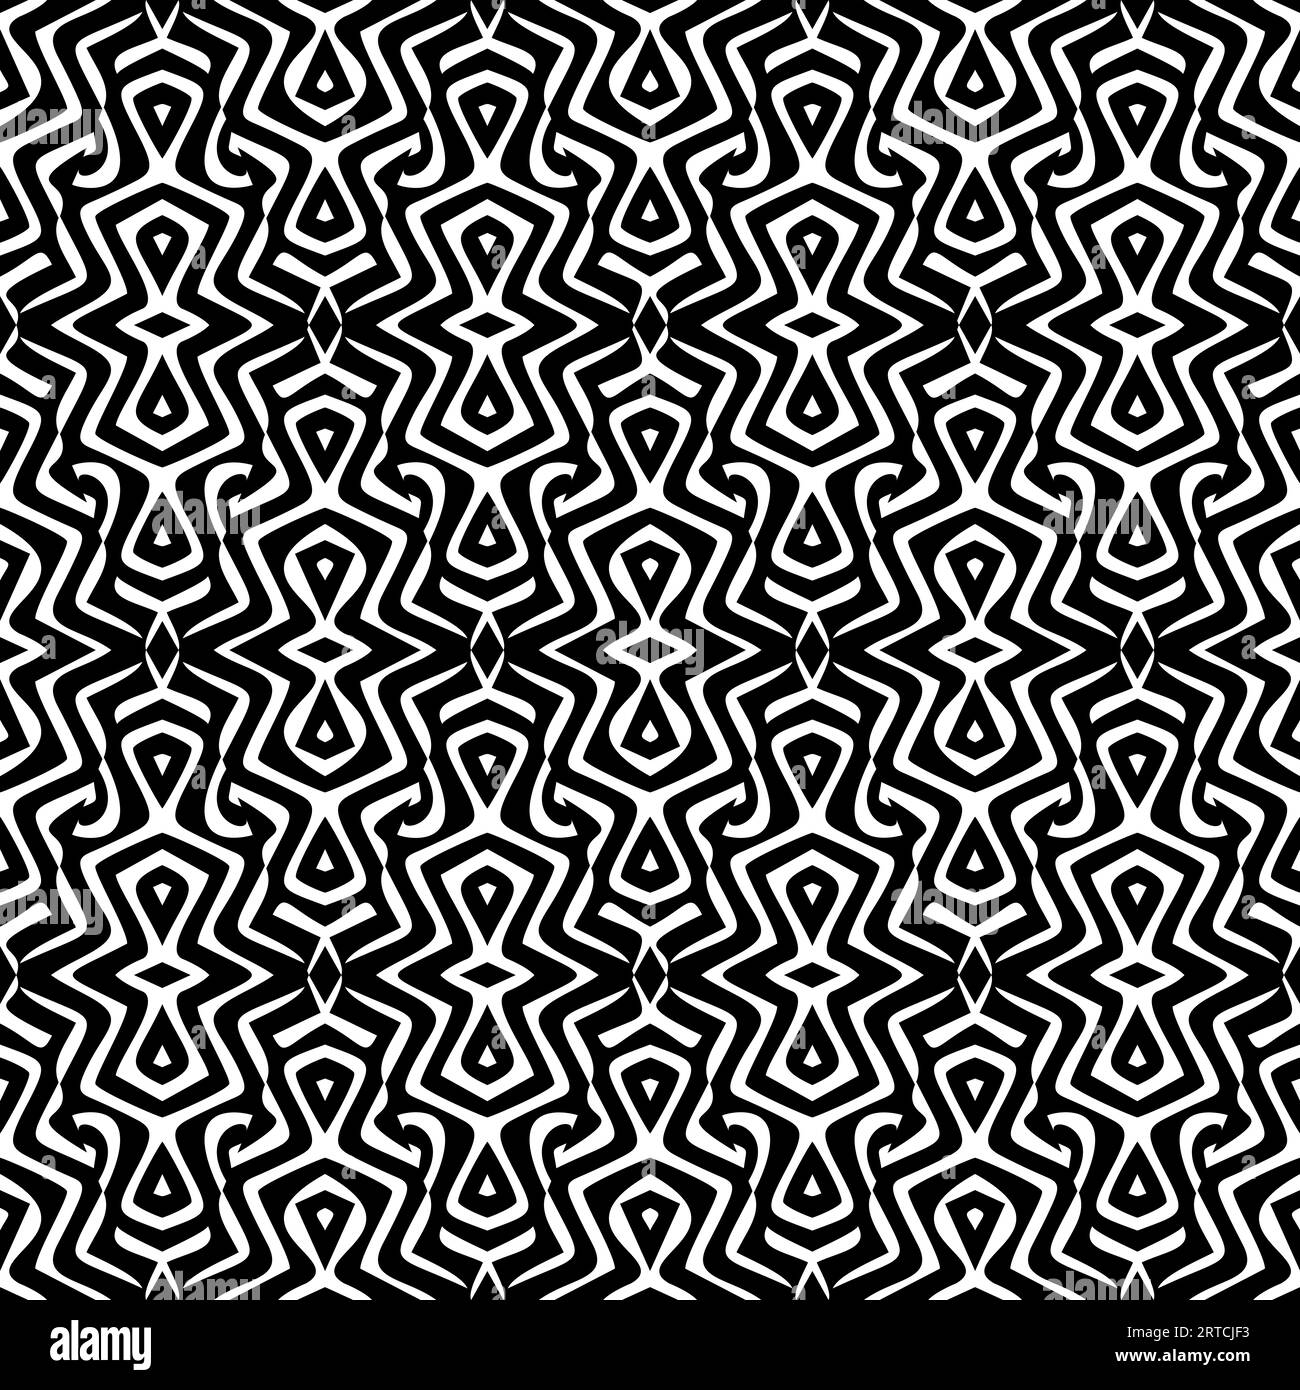 Seamless pattern with ethnic motifs in black and white Stock Photo